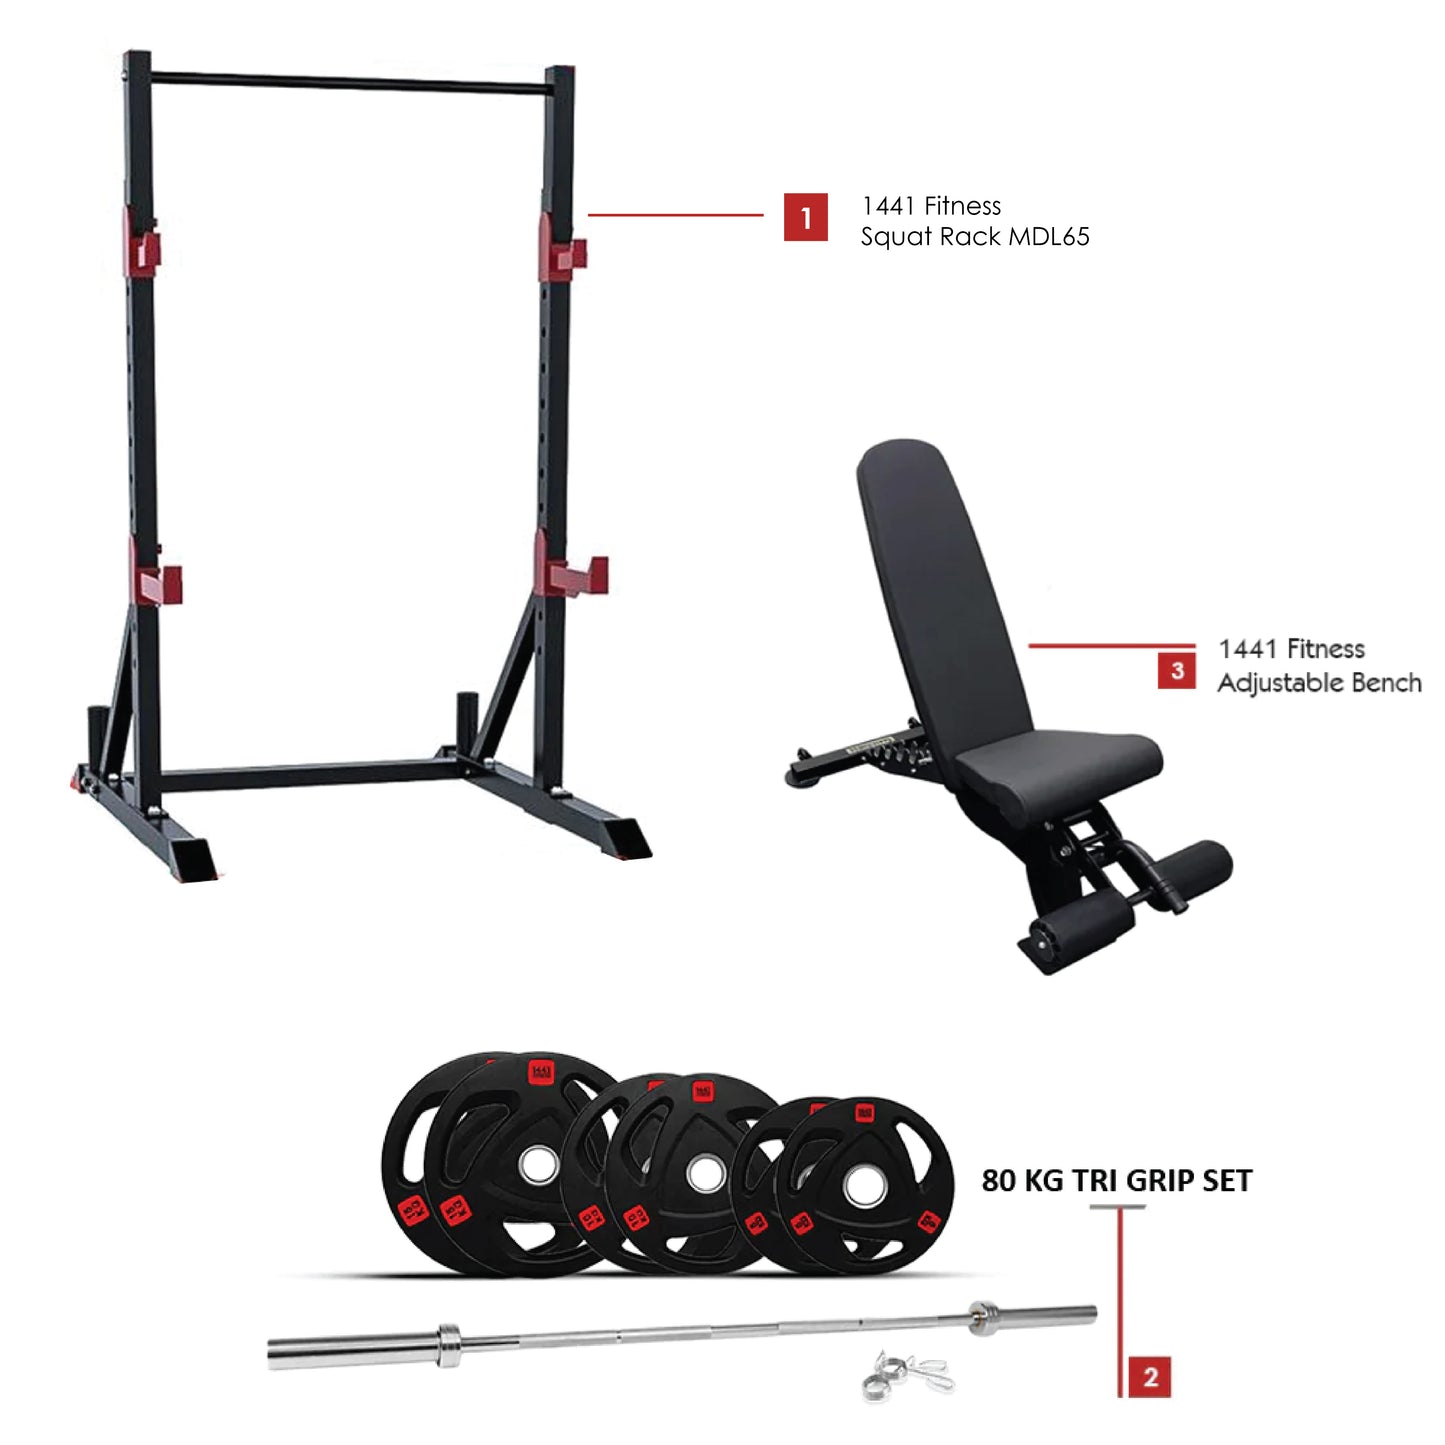 Combo Deal | 1441 Fitness Squat Rack MDL65 +7 ft Barbell with 80 Kg tri Grip Plate Set + Adjustable Bench A8007